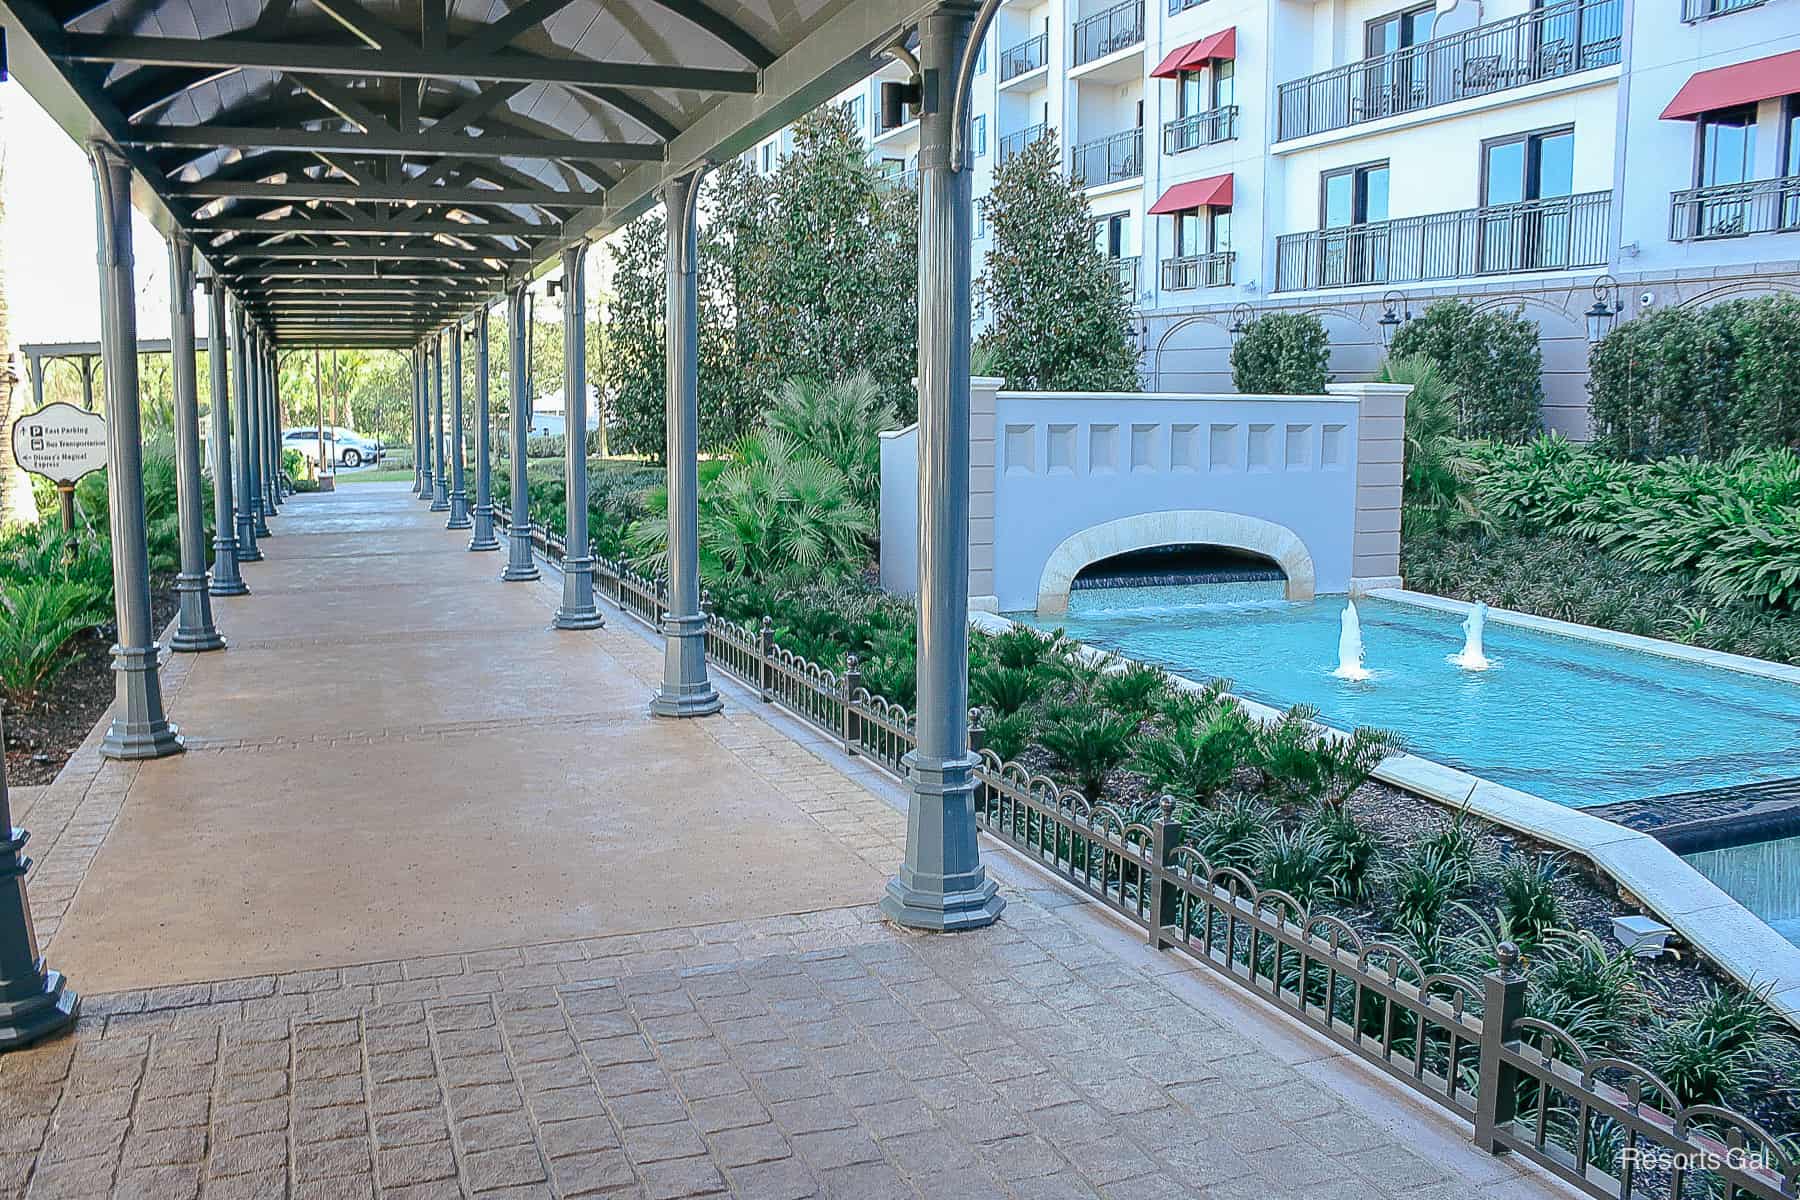 the walkway that leads to the entrance with a water fountain to the right side 